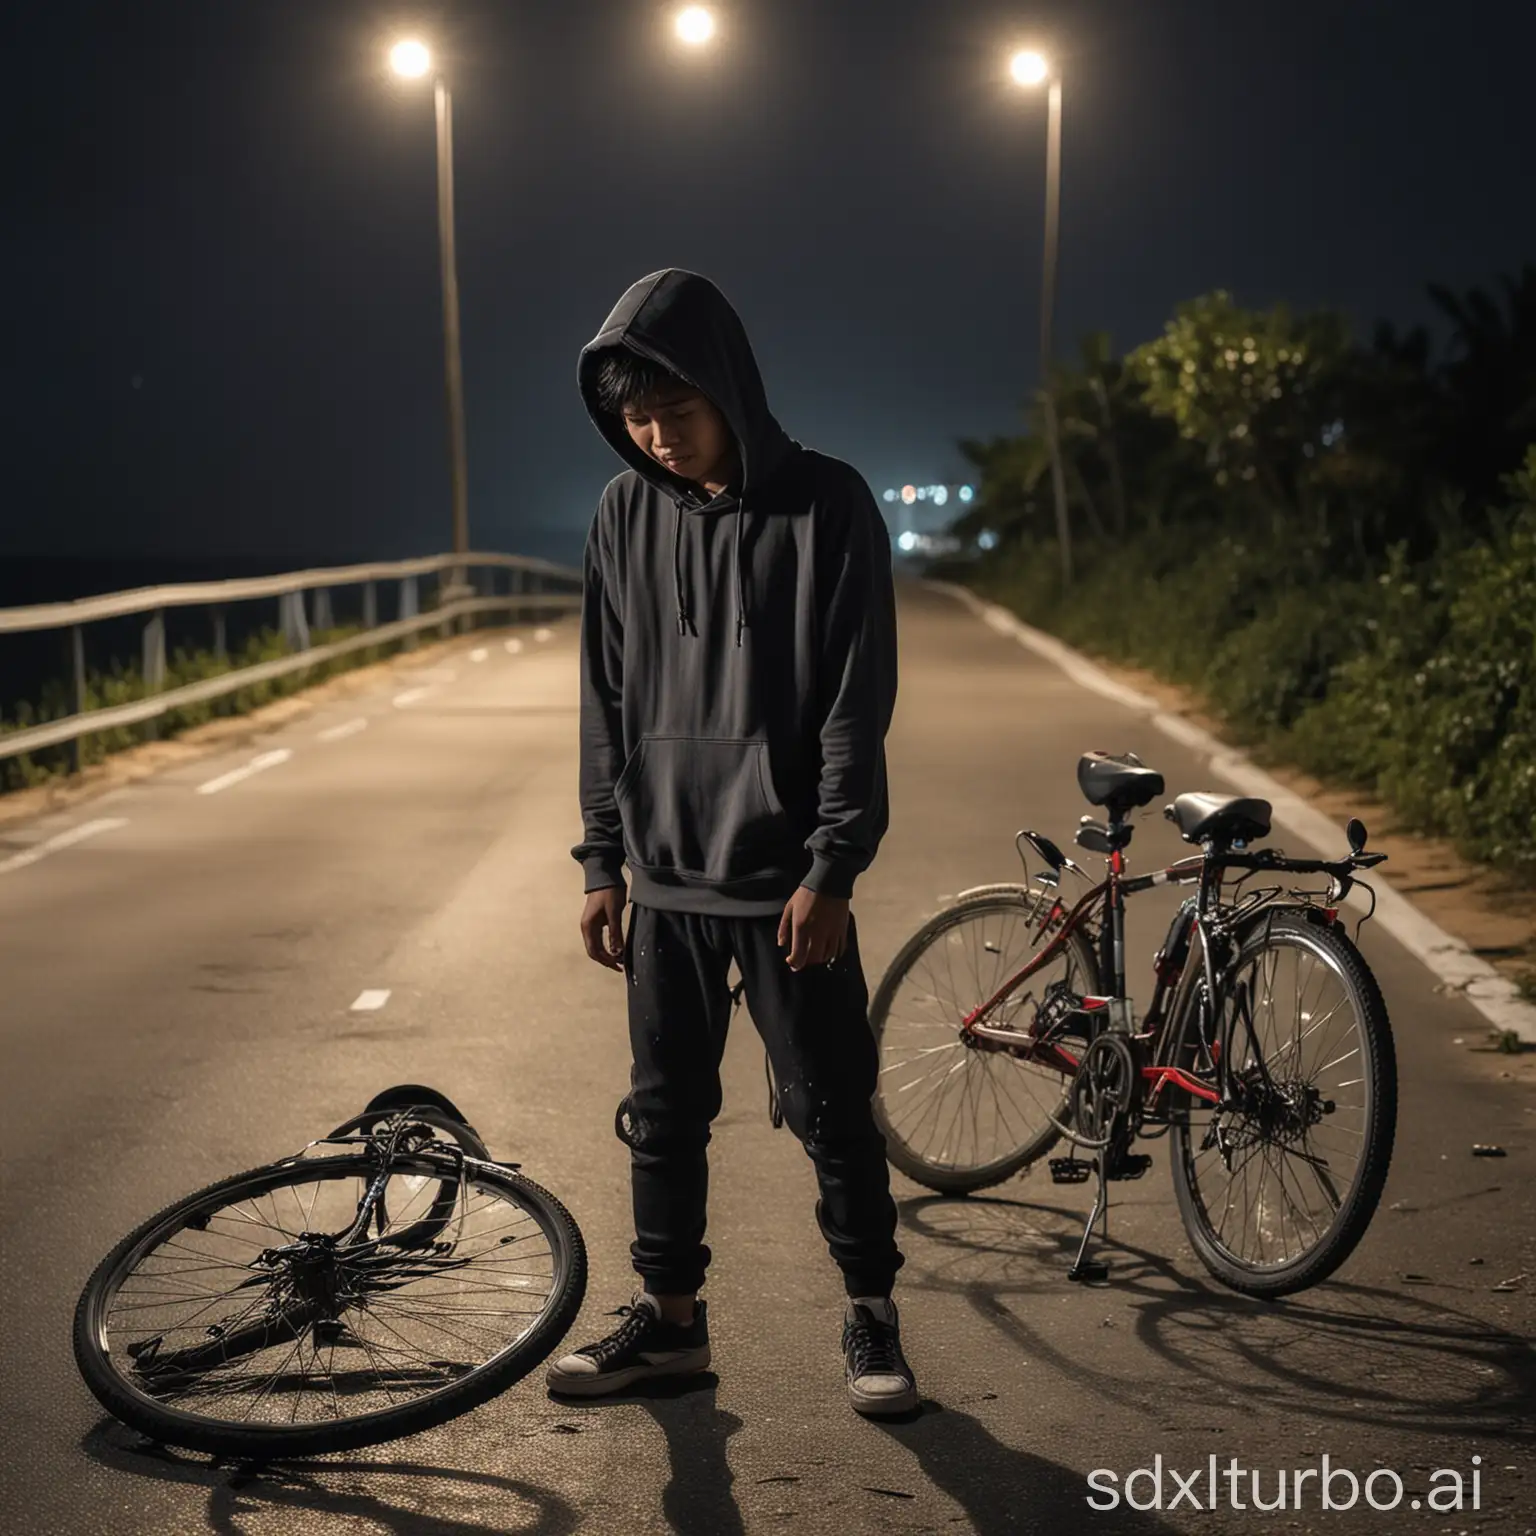 malay teenager boy wearing hoodie and long pants, crying on the road after having a small accident with his bicycle, the background is a road and a beach in night